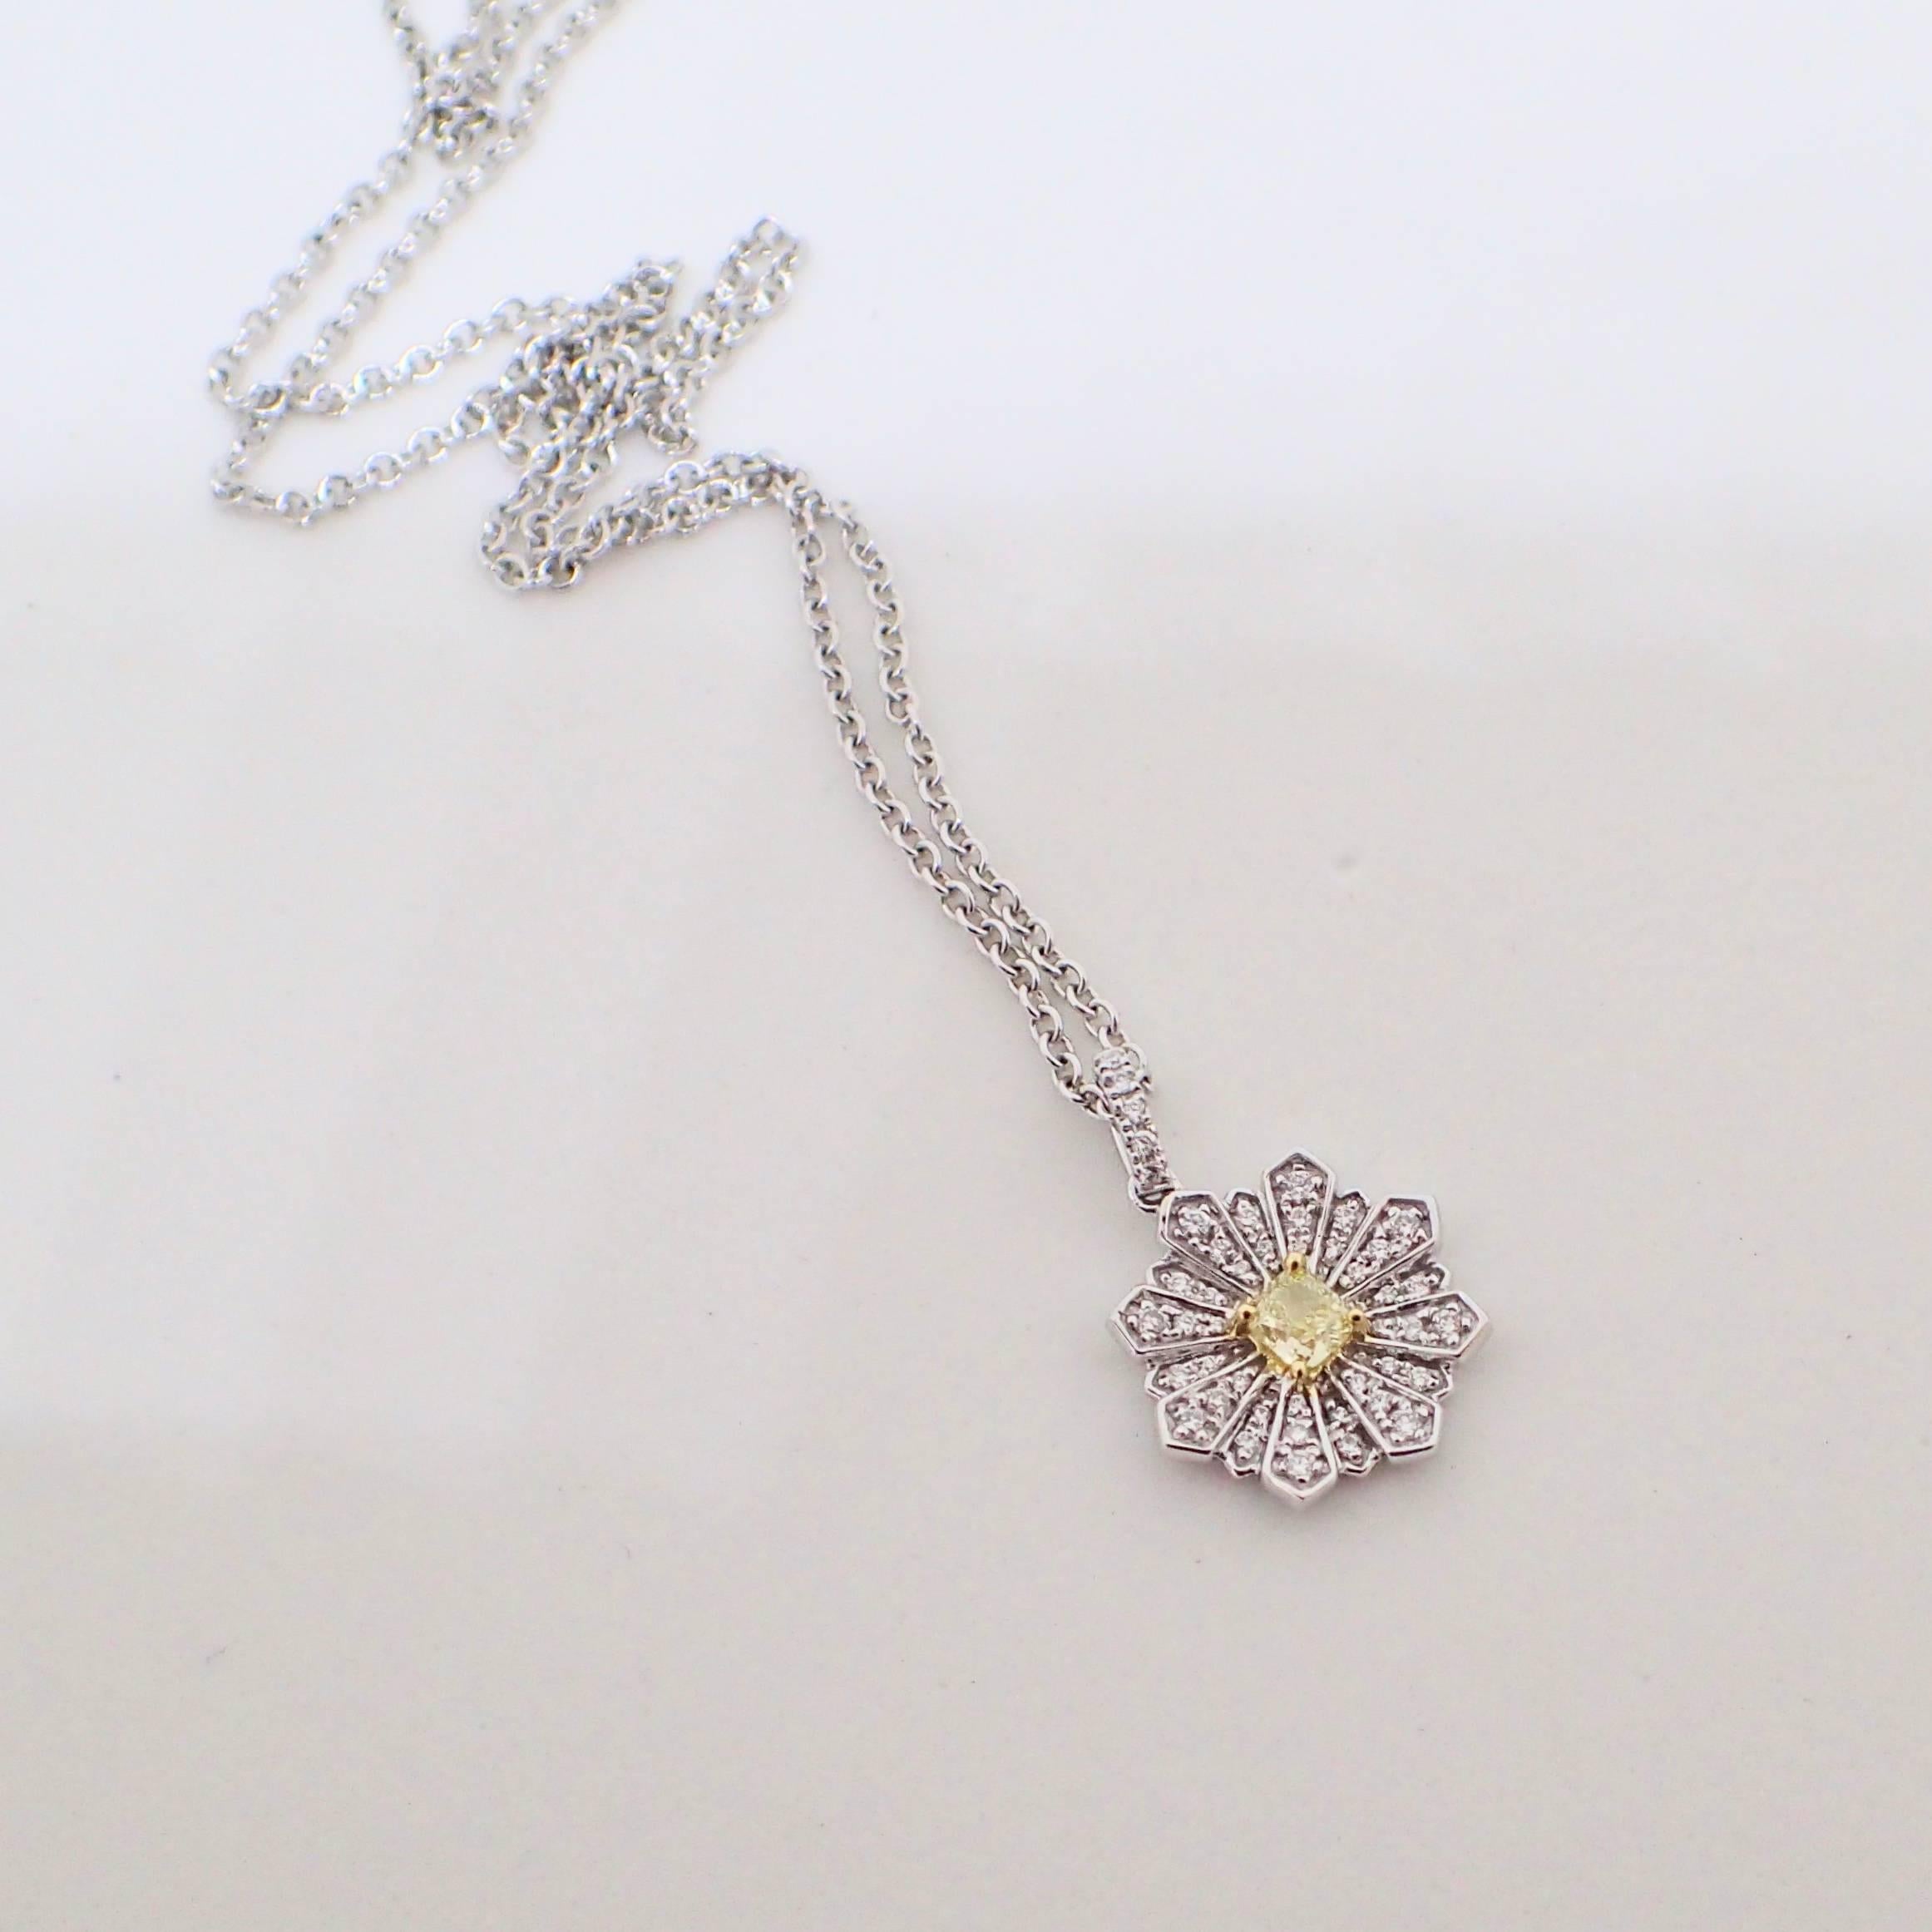 Contemporary Flower Pendant with a 0.24 Carat Yellow Diamond and 0.24 Carat of White Diamond